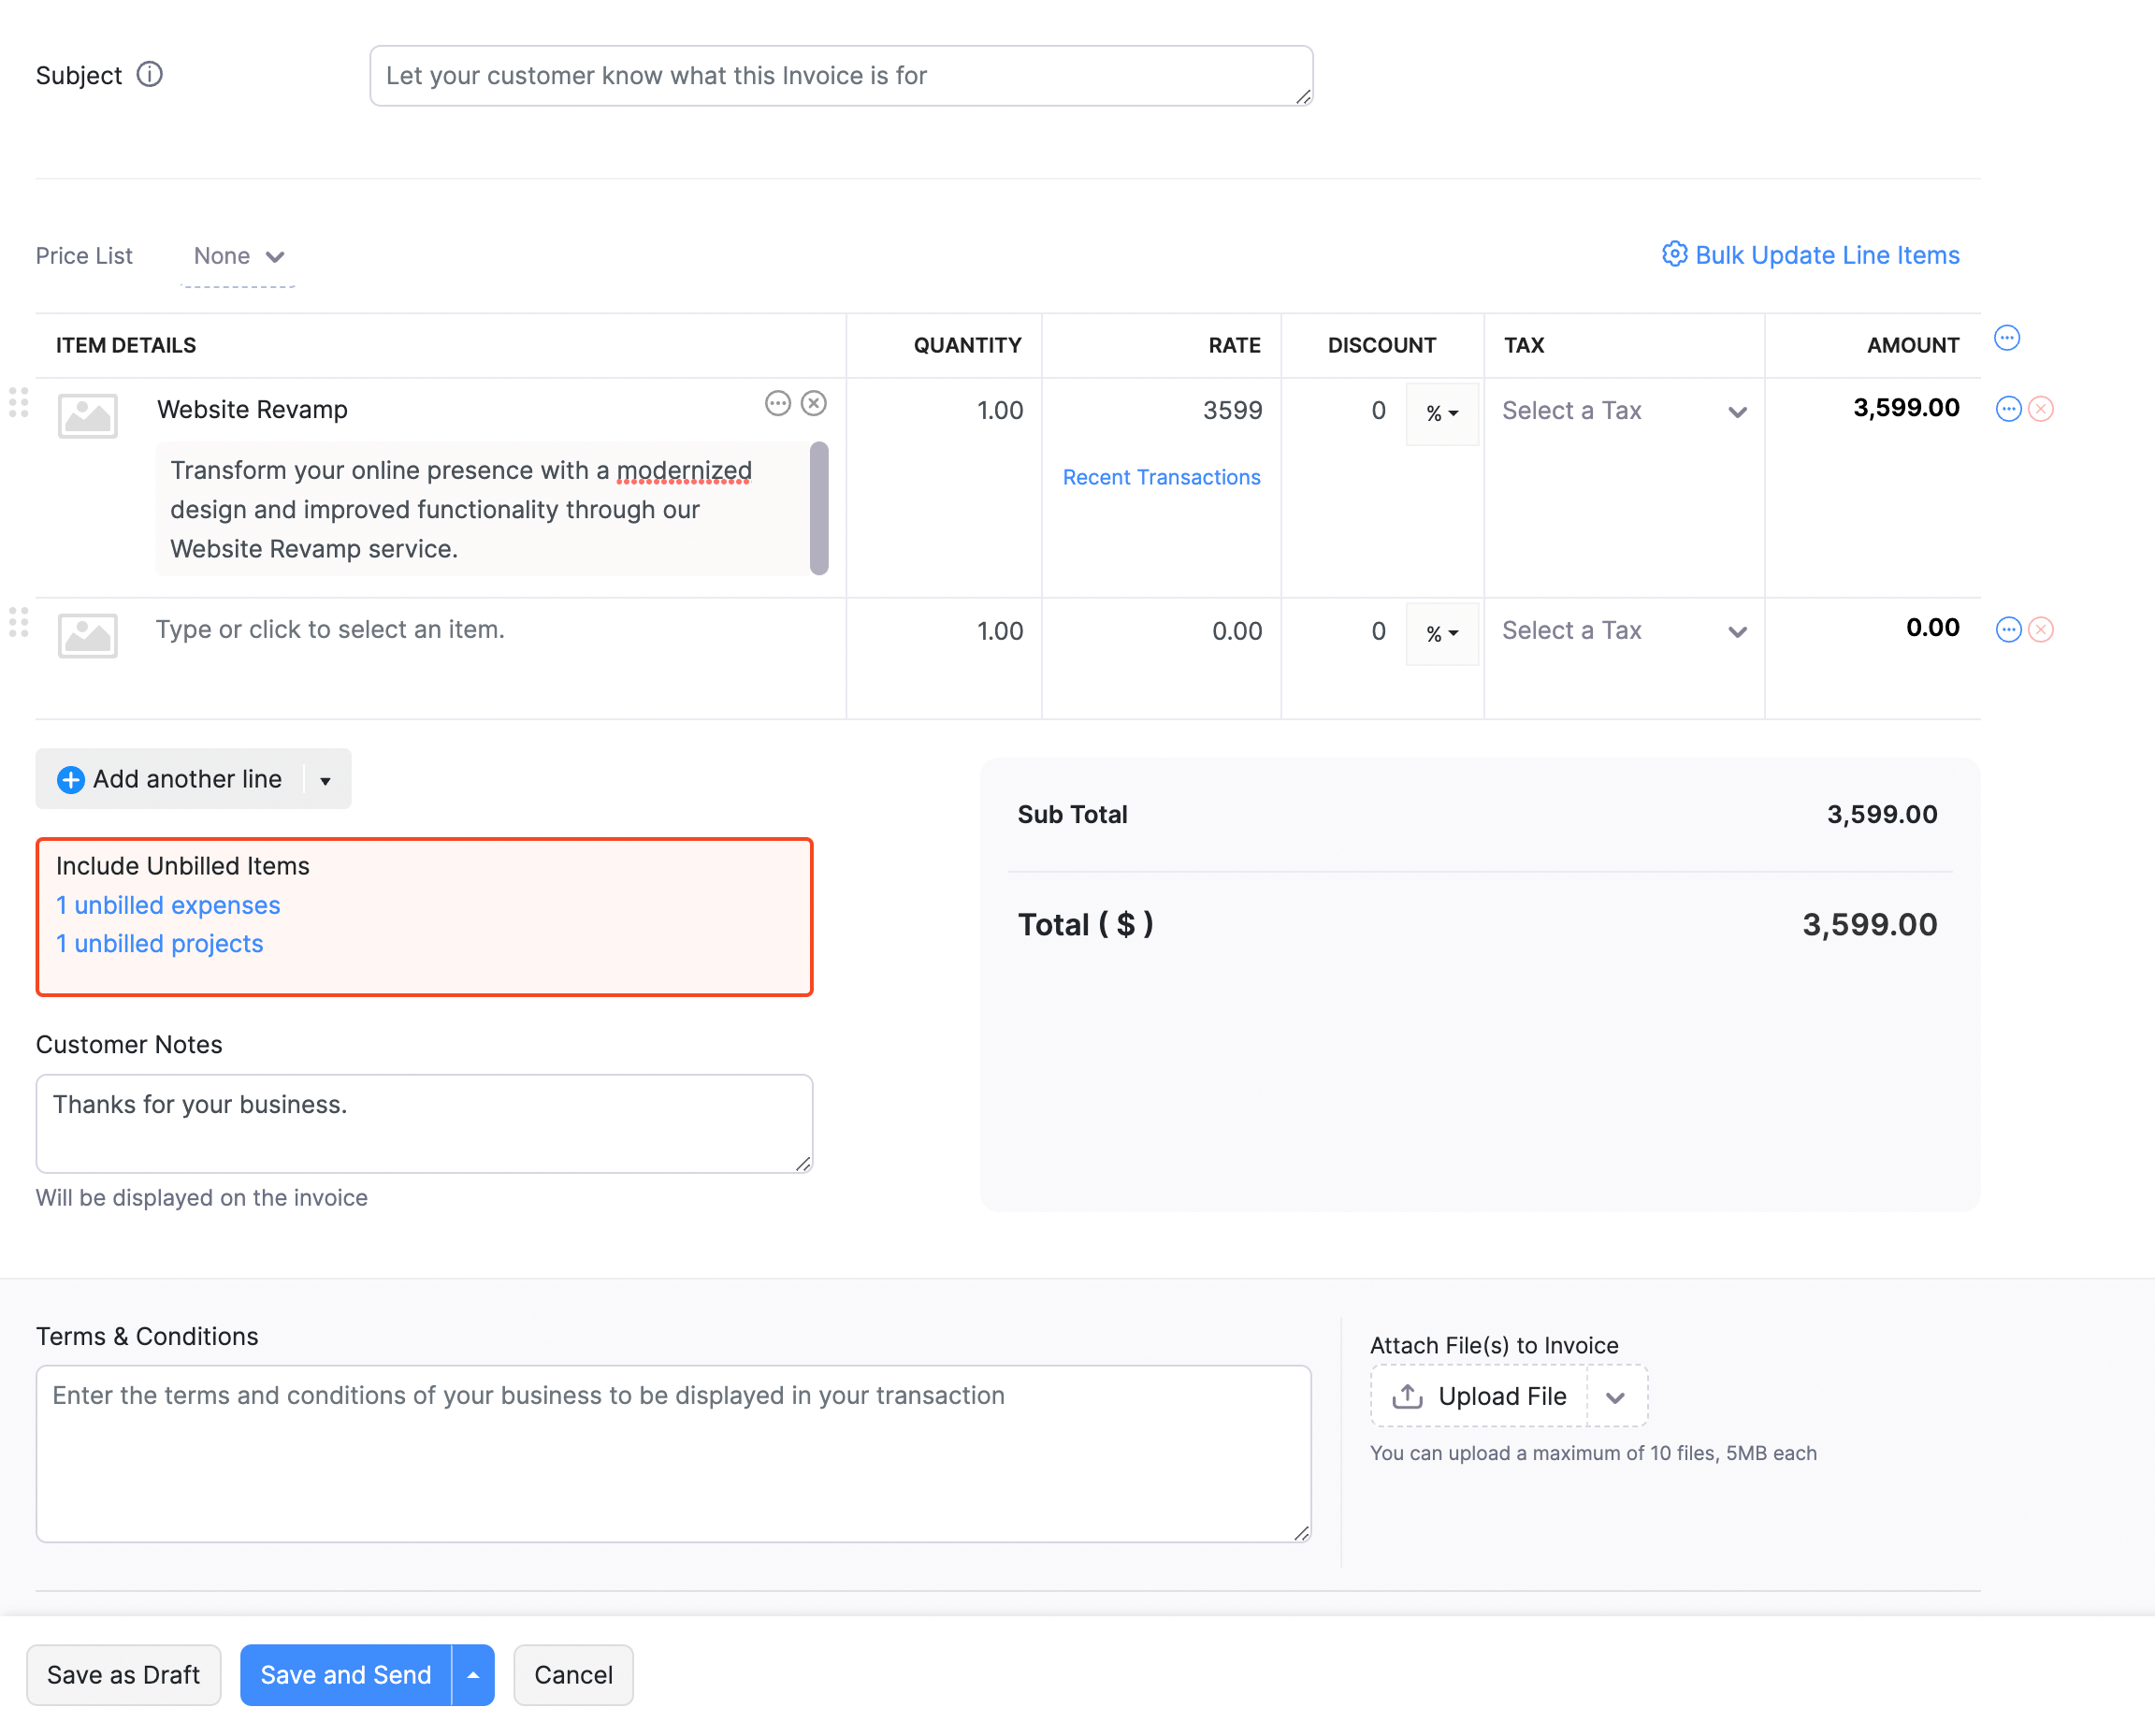 Add Expenses as Line Items